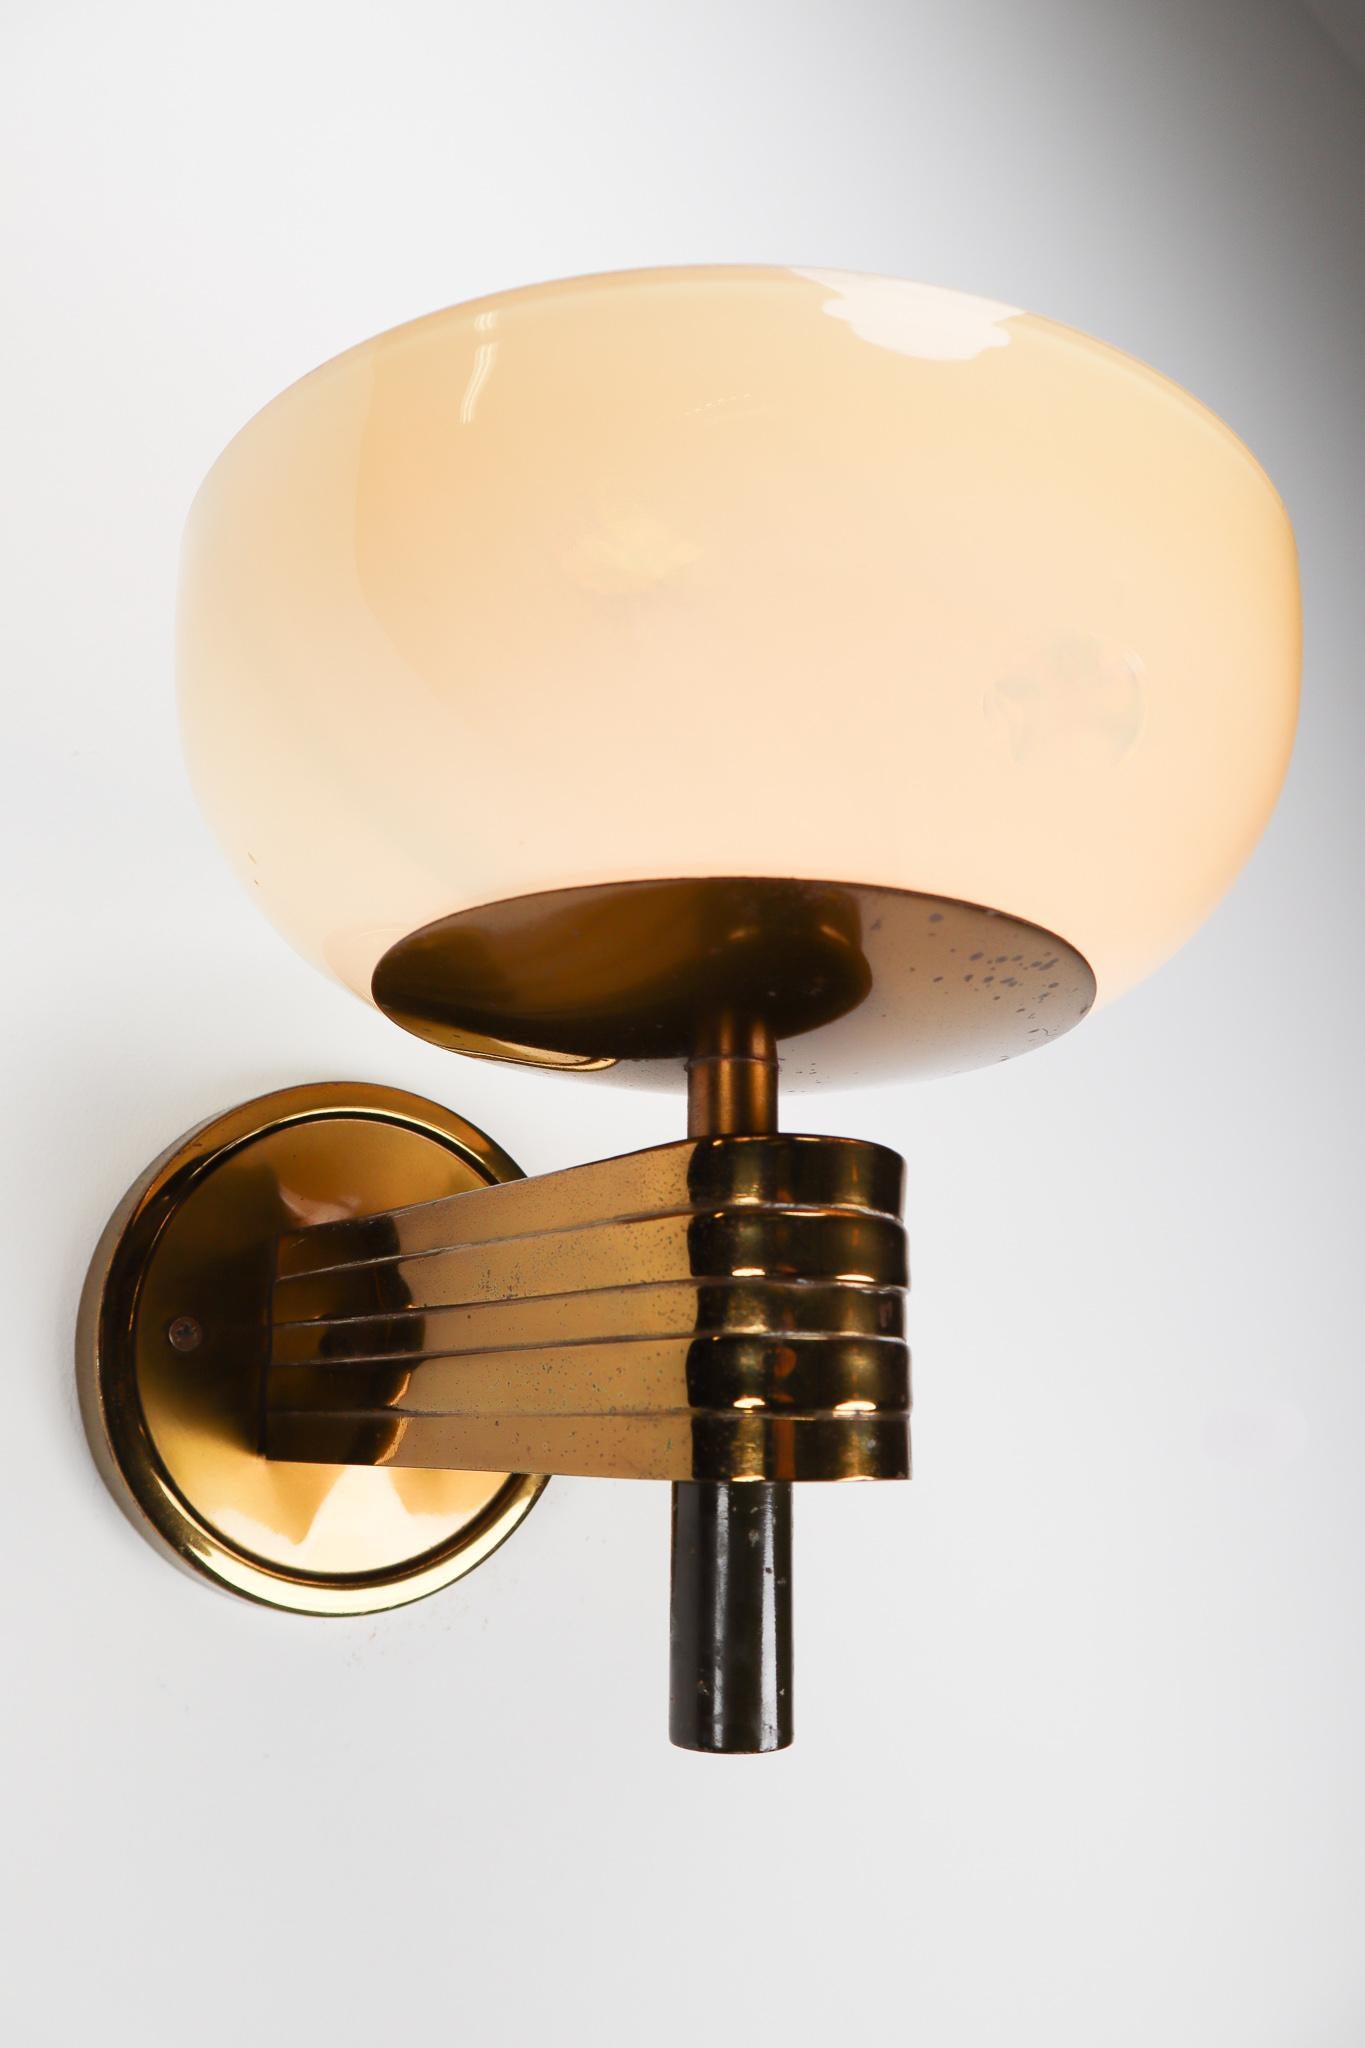 Large Art-Deco sconces with opaline glass and brass manufactured in Germany 1930s. The pleasant light it spreads is very atmospheric, these wall scones will contribute to a luxurious character of the (hotel-bar) interior. Good original condition